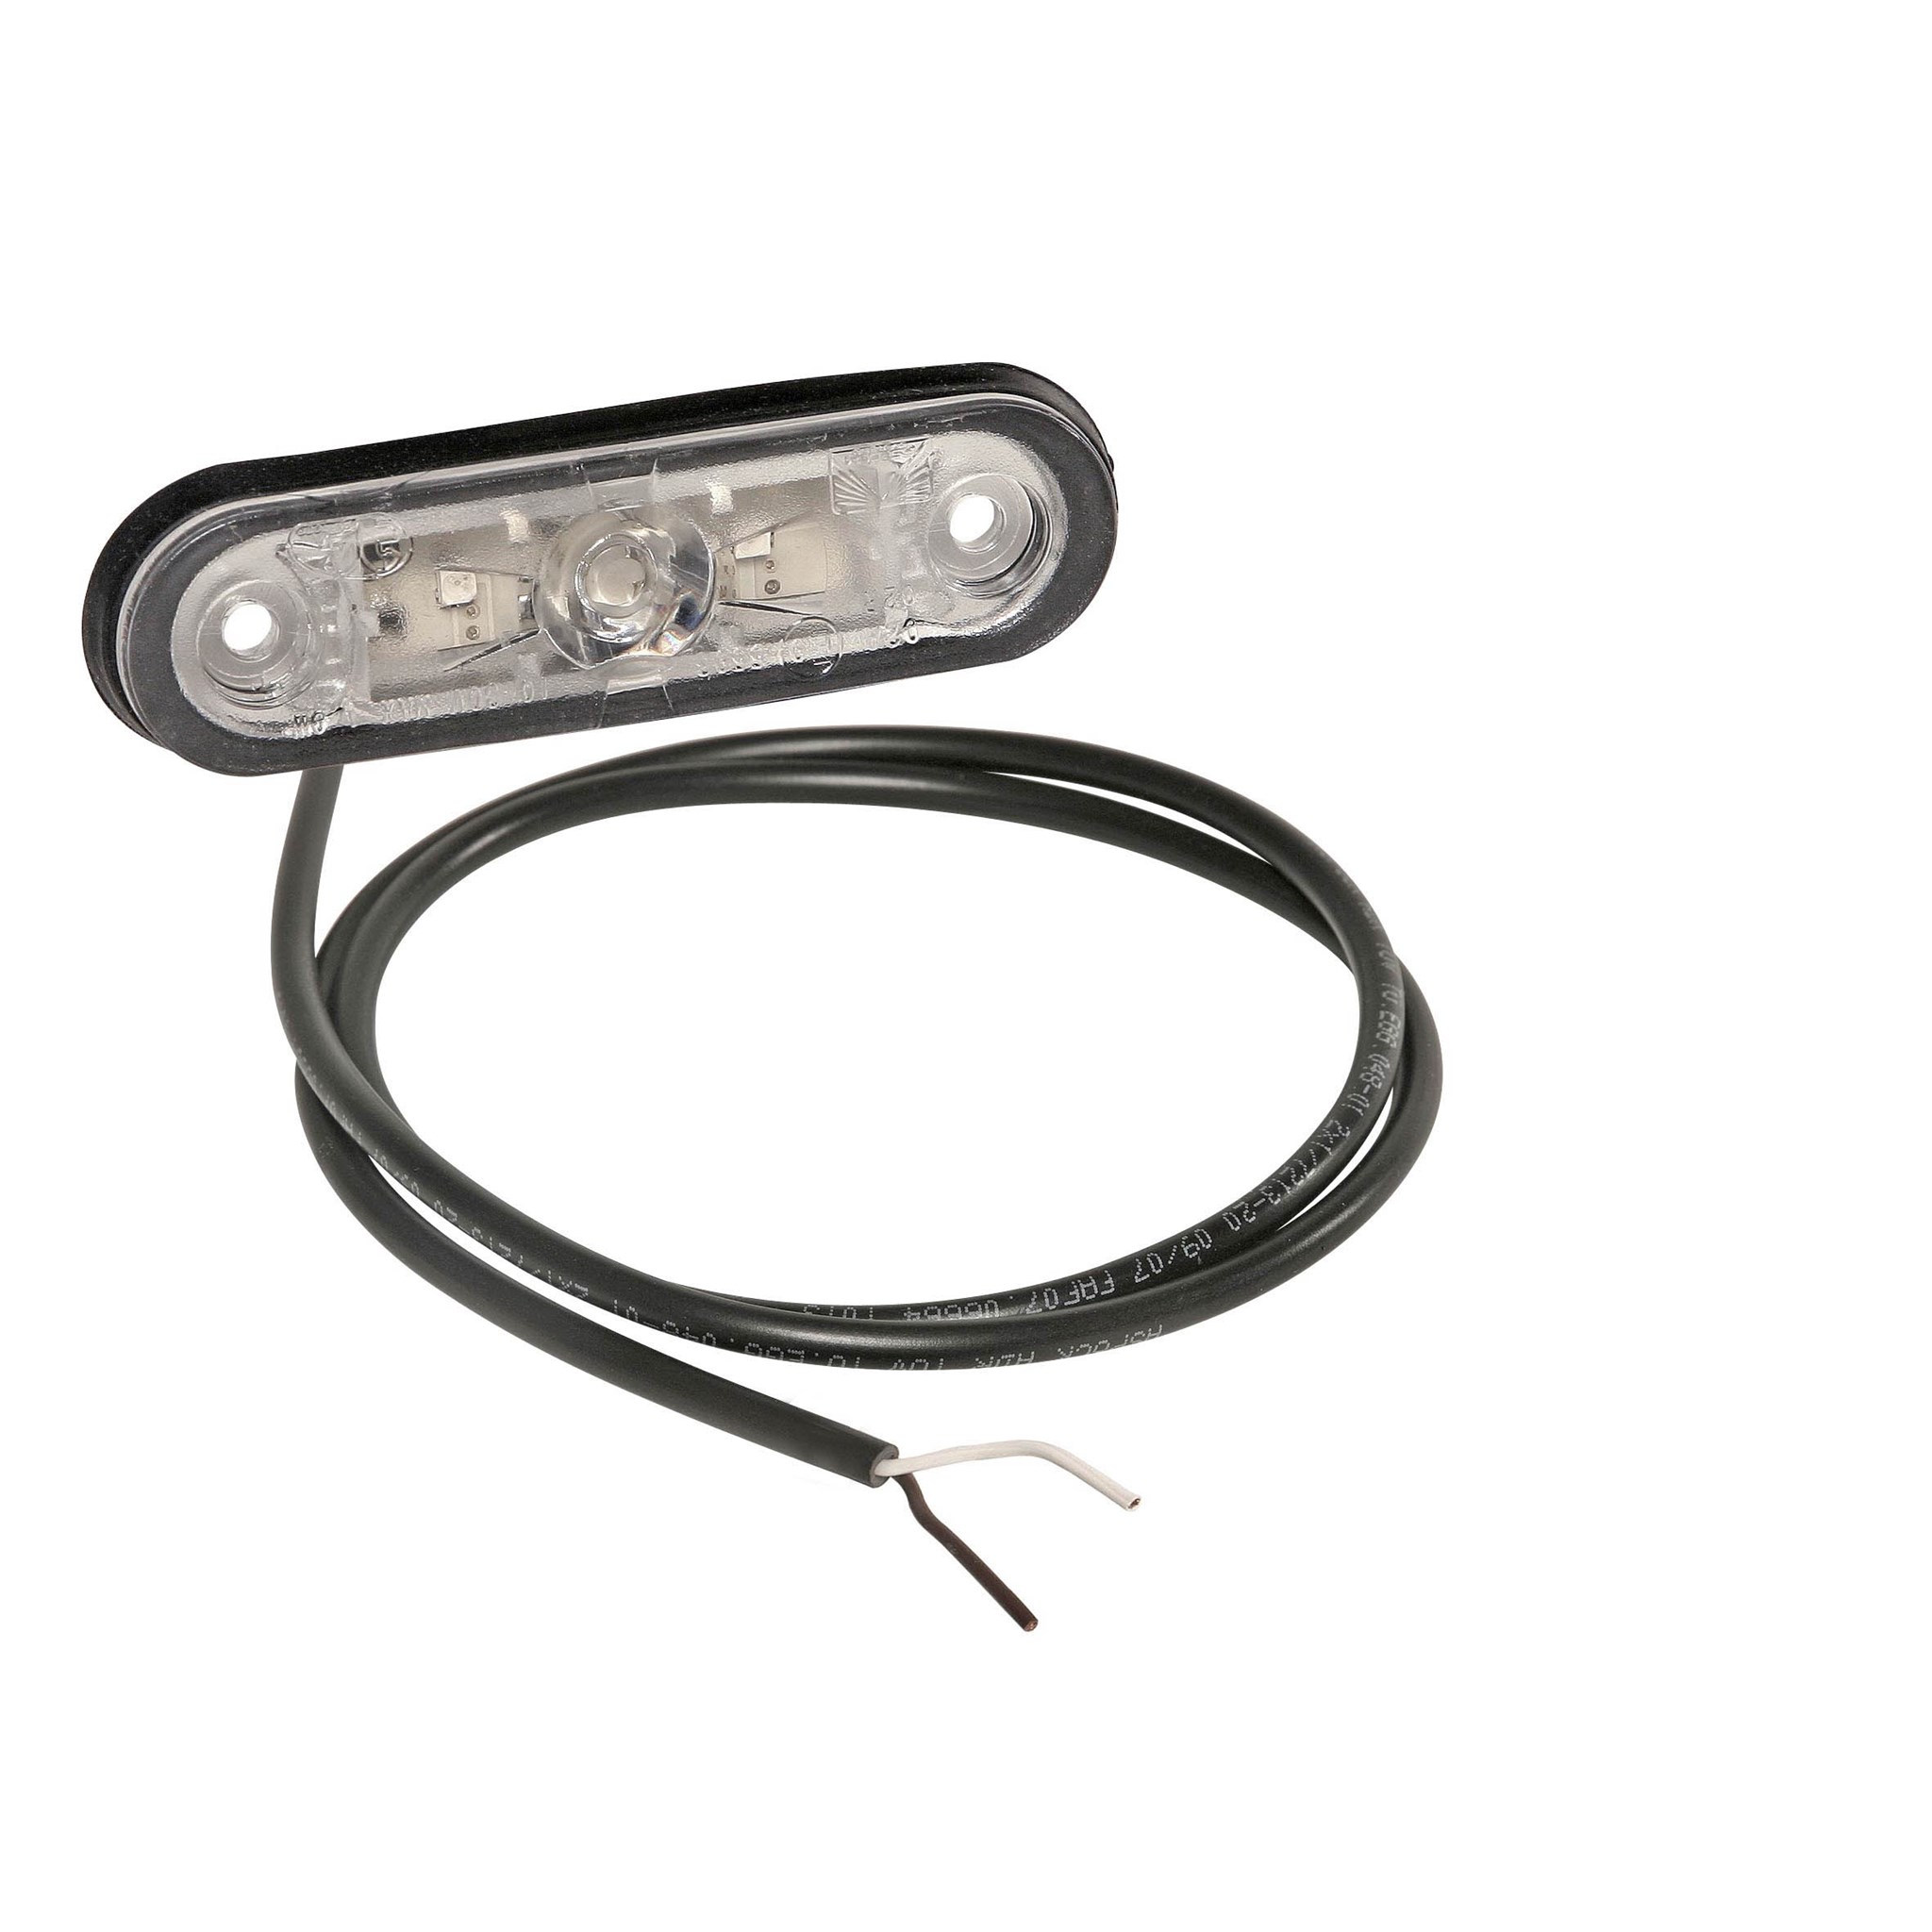 Picture of 31-7300-087 Aspöck Posipoint II gelb 2x LED 300mm Kabel open end